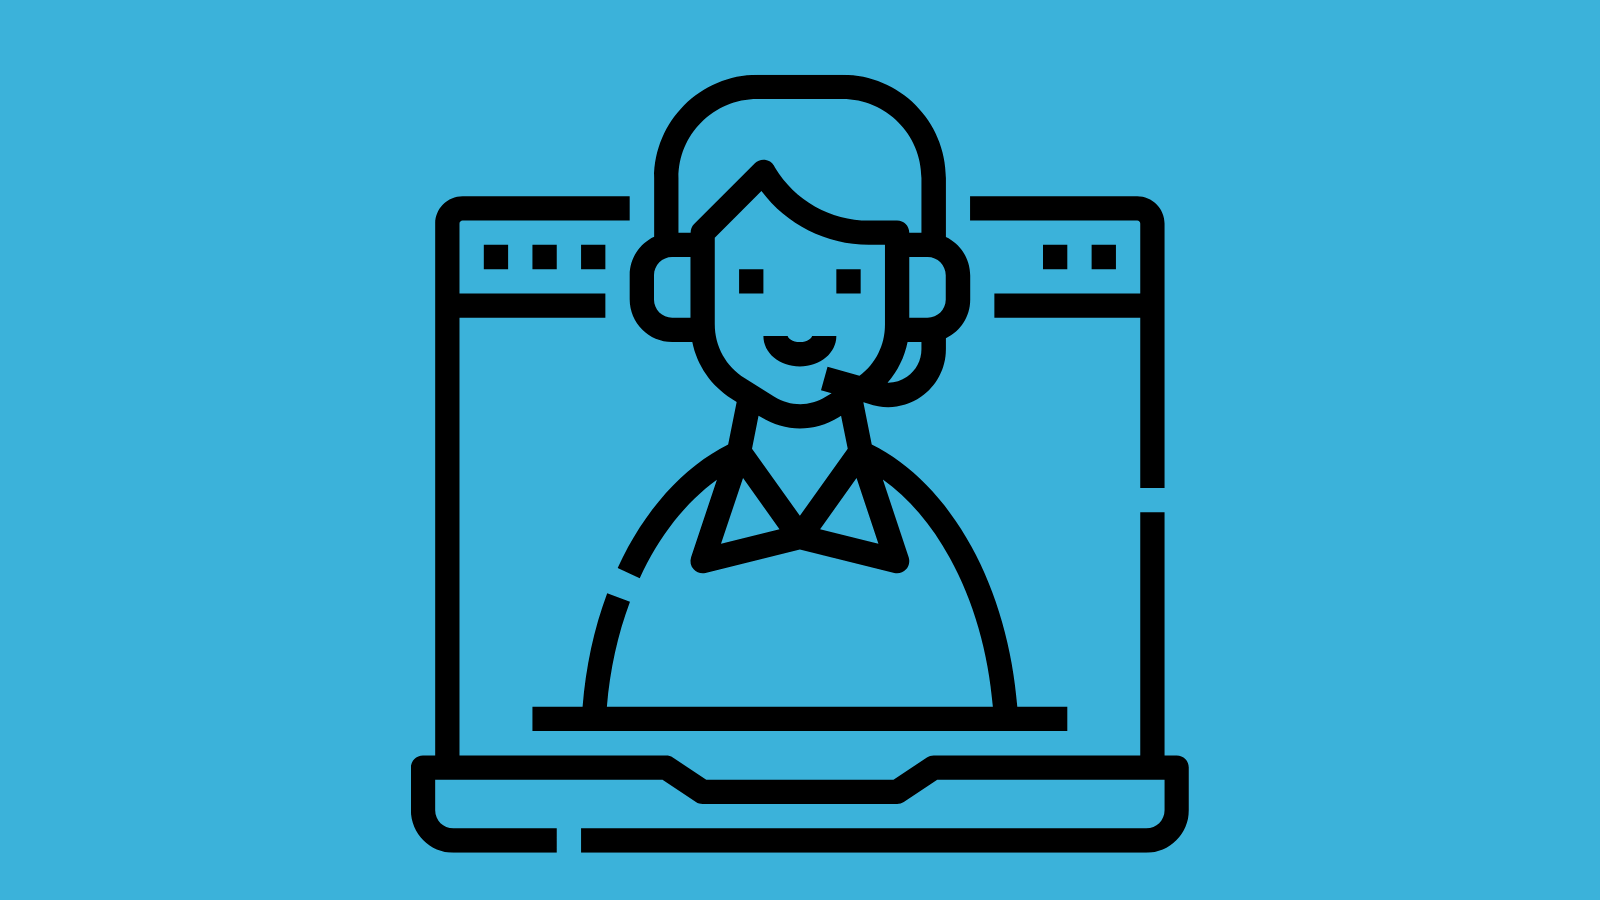 A graphic of a laptop with a person wearing a headset on-screen